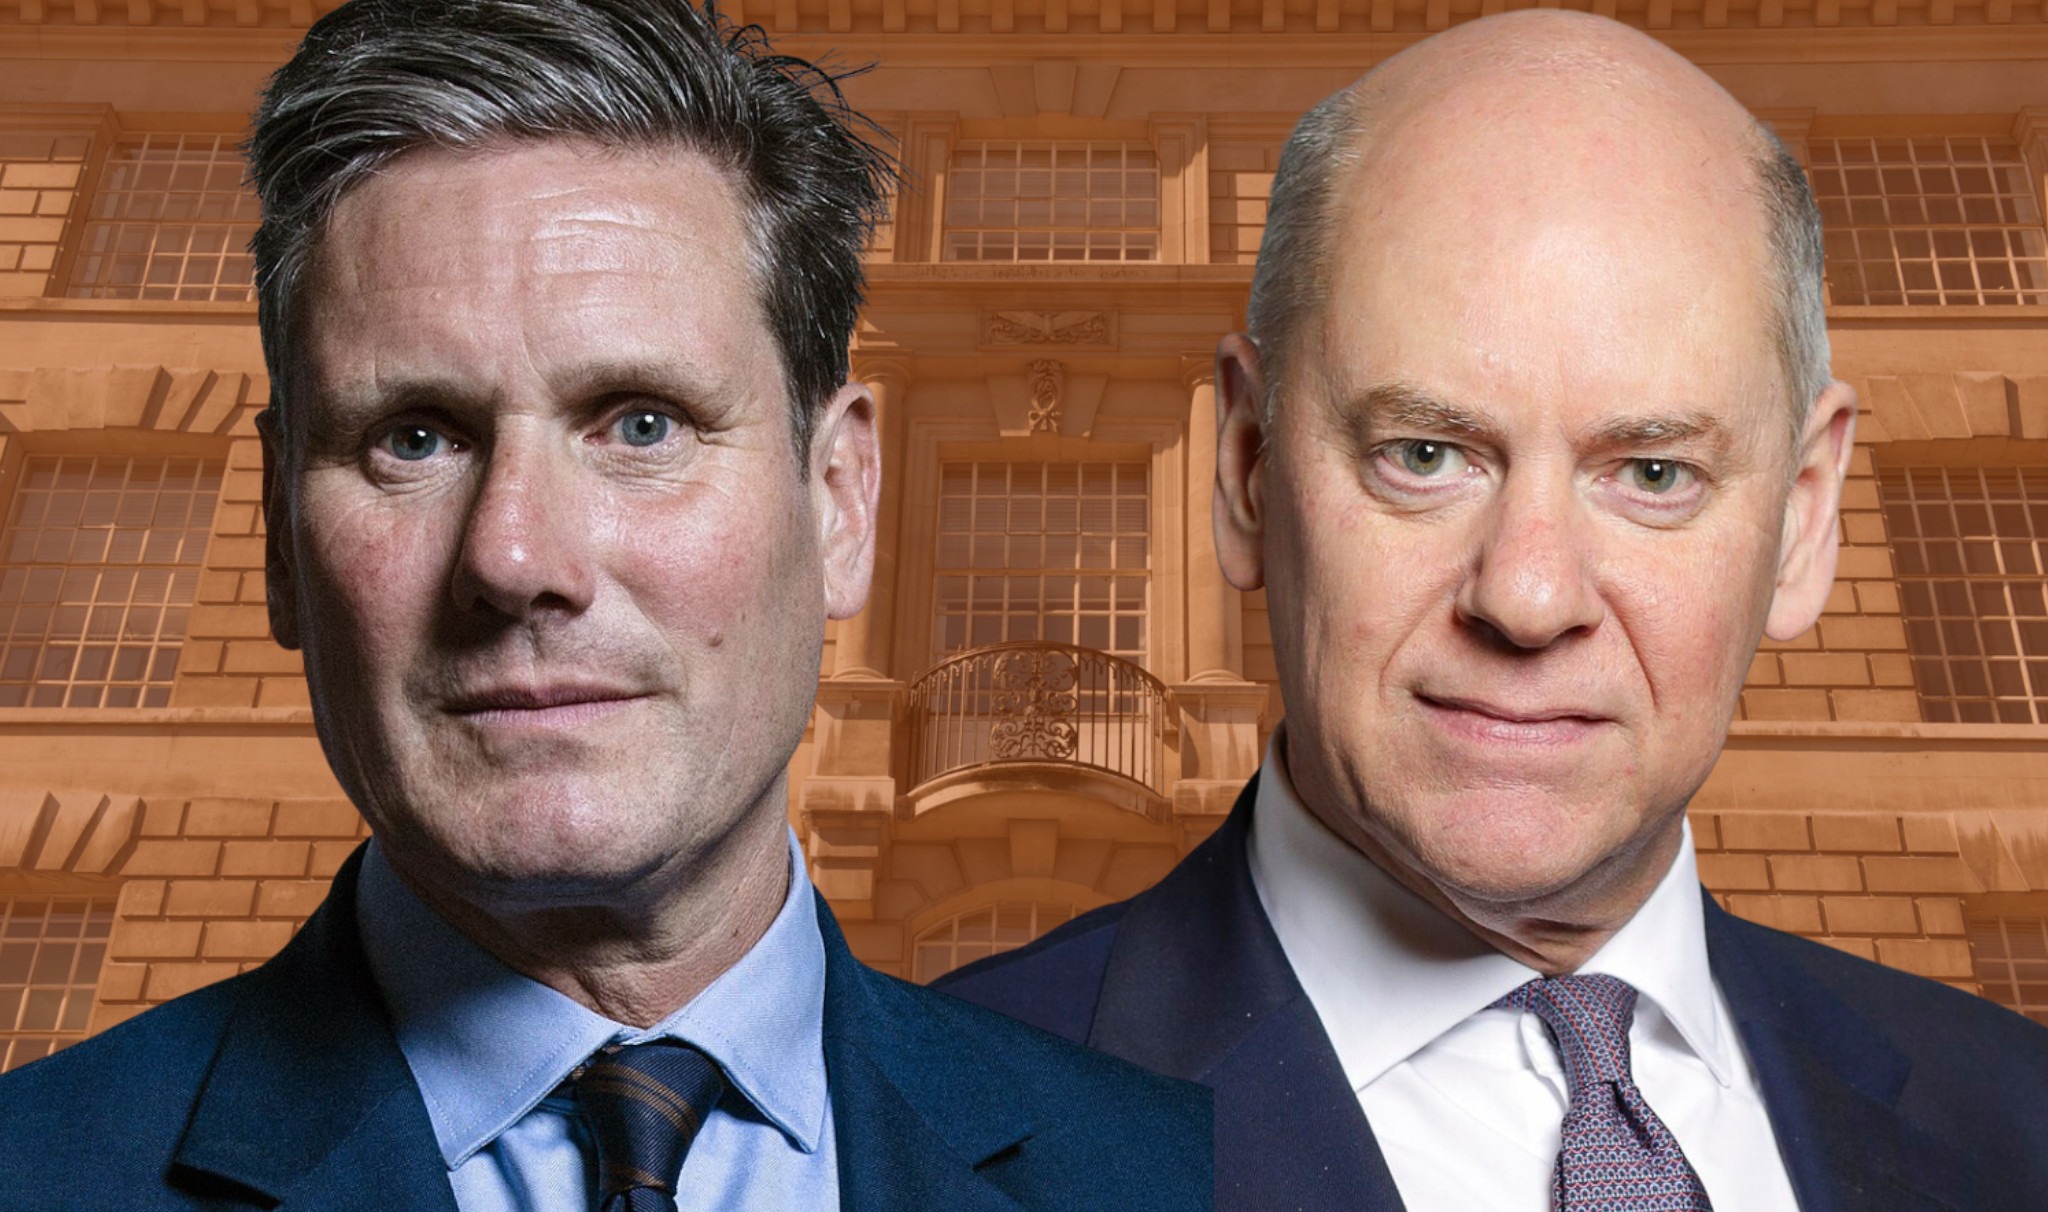 Revealed: After clearing MI5 of torture, Keir Starmer attended its chief’s leaving party